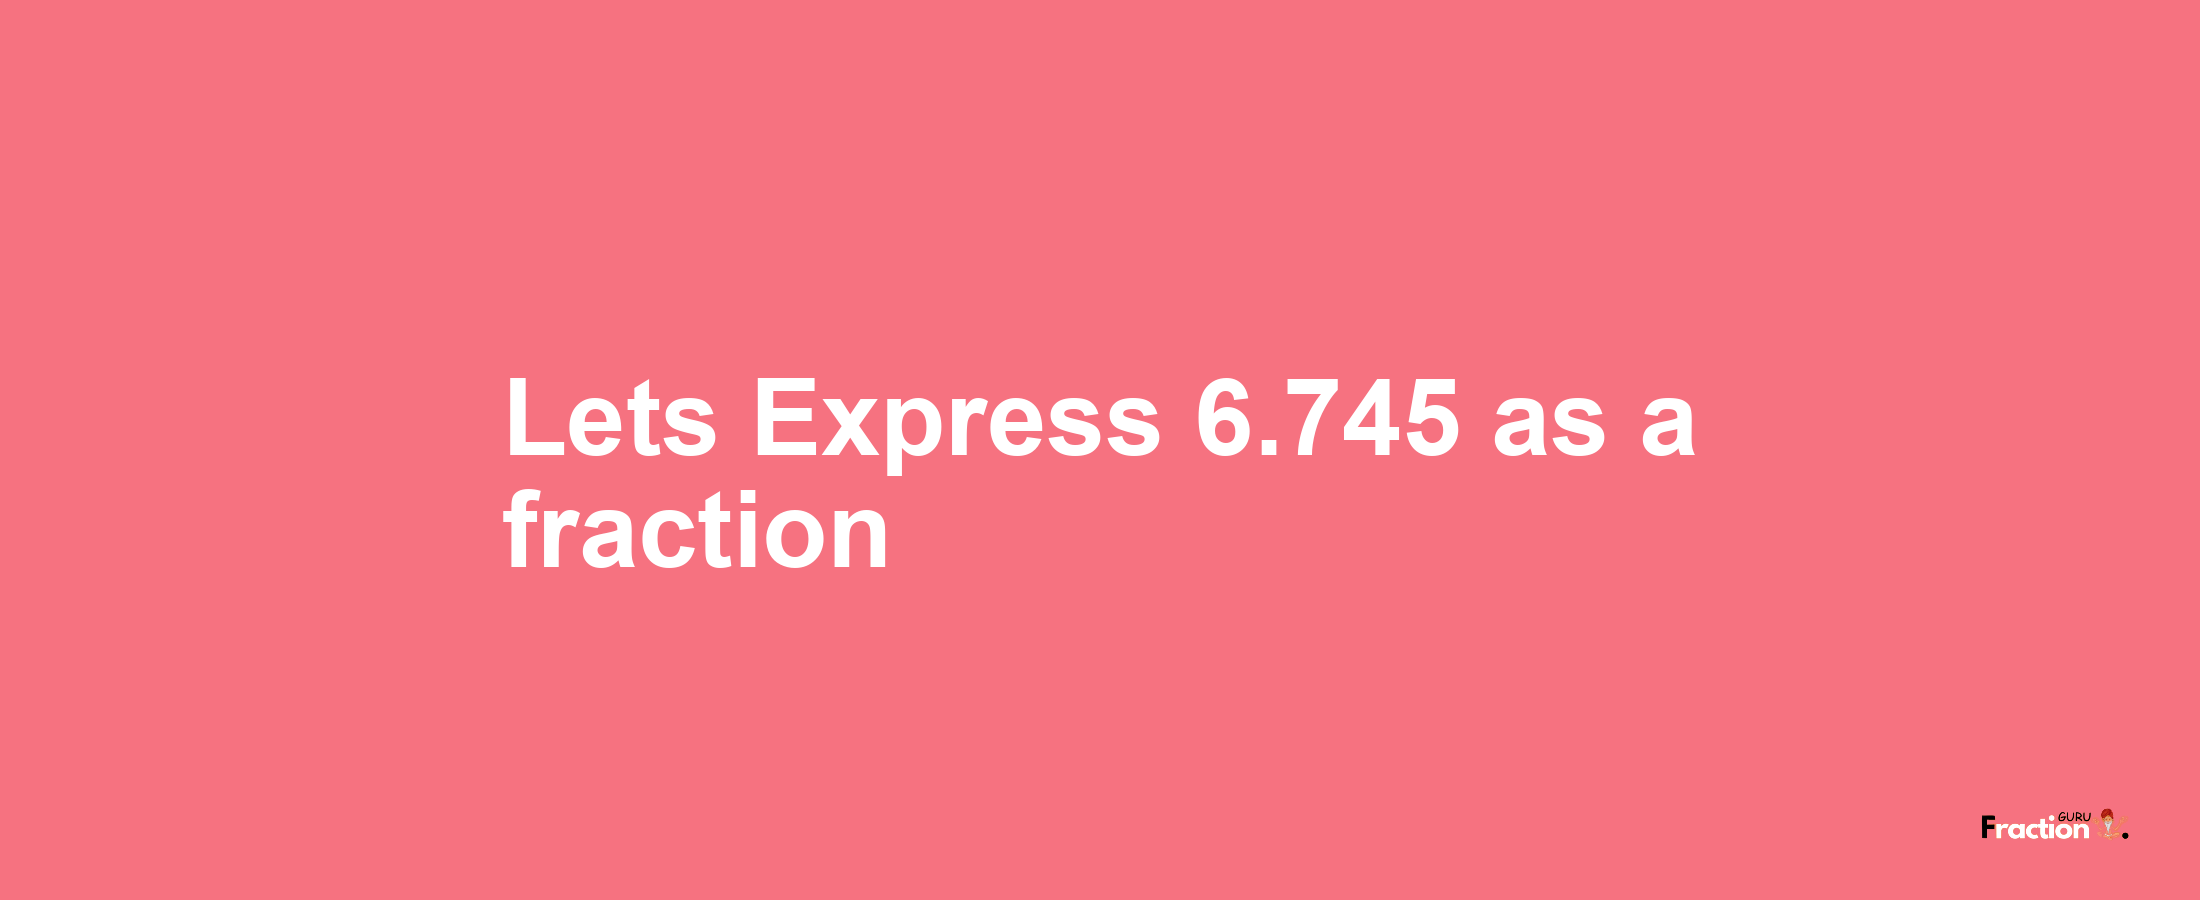 Lets Express 6.745 as afraction